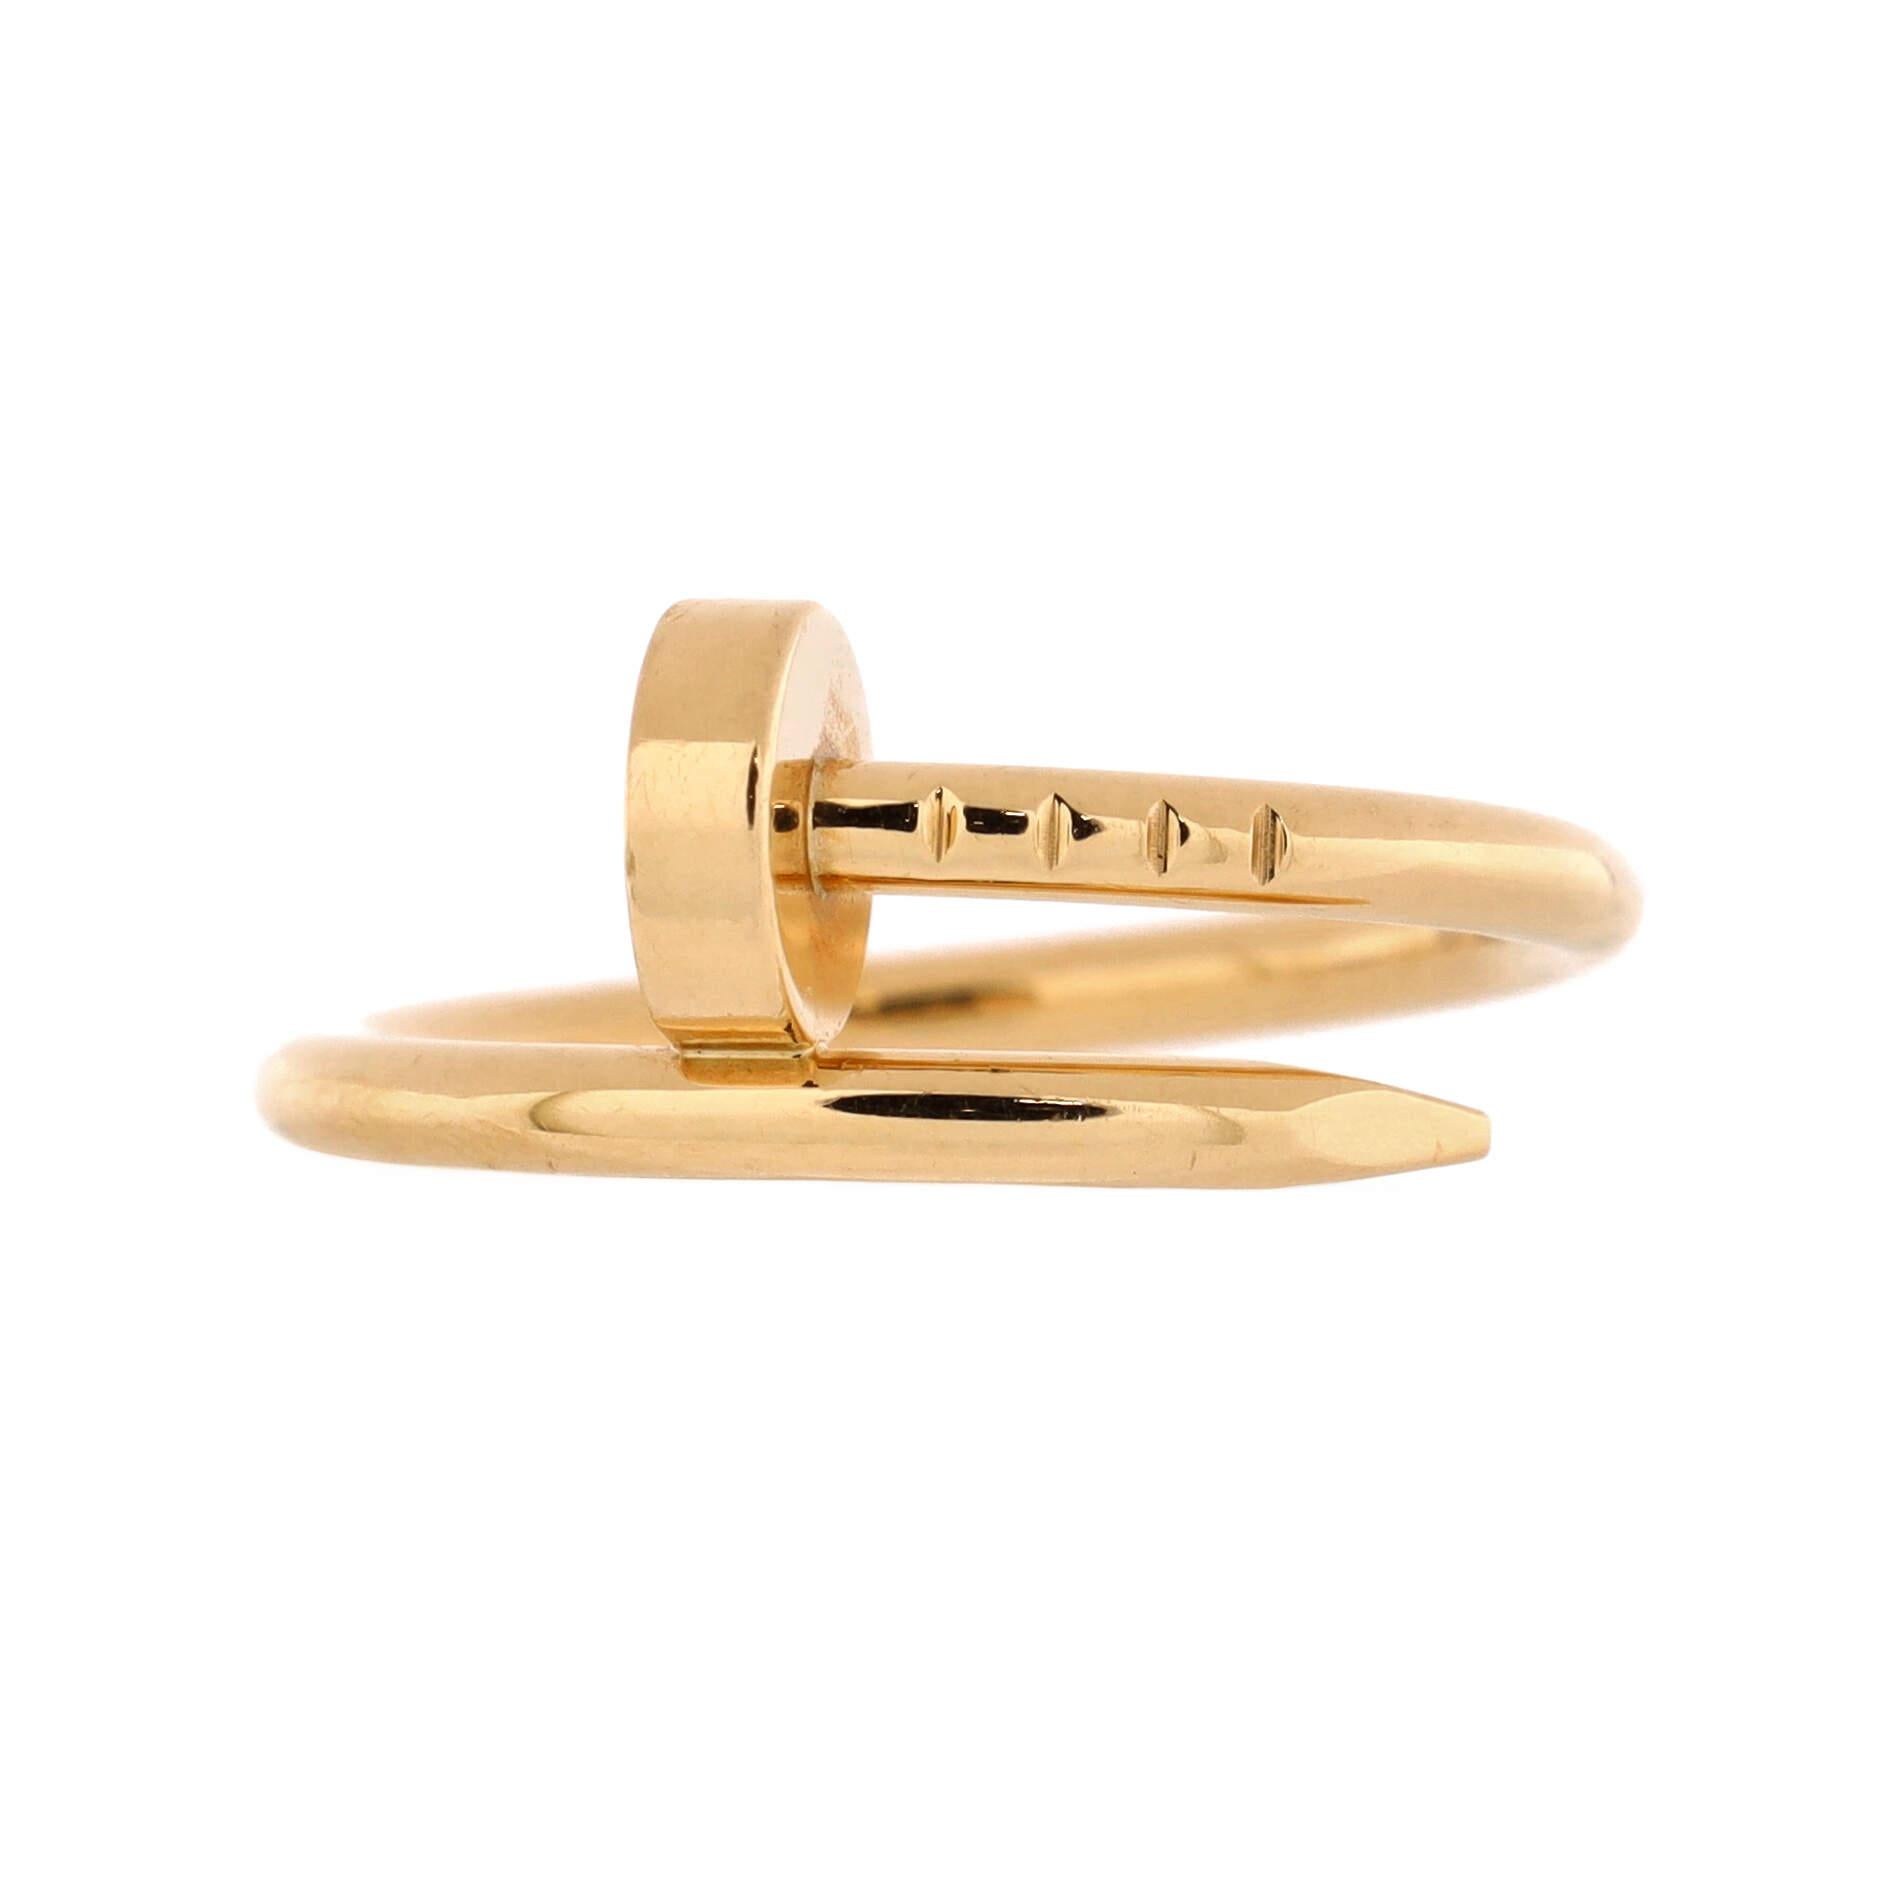 Condition: Great. Minor wear throughout.
Accessories: No Accessories
Measurements: Size: 3.75 - 46, Width: 1.8 mm
Designer: Cartier
Model: Juste un Clou Ring 18K Yellow Gold Small
Exterior Color: Yellow Gold
Item Number: 209294/34